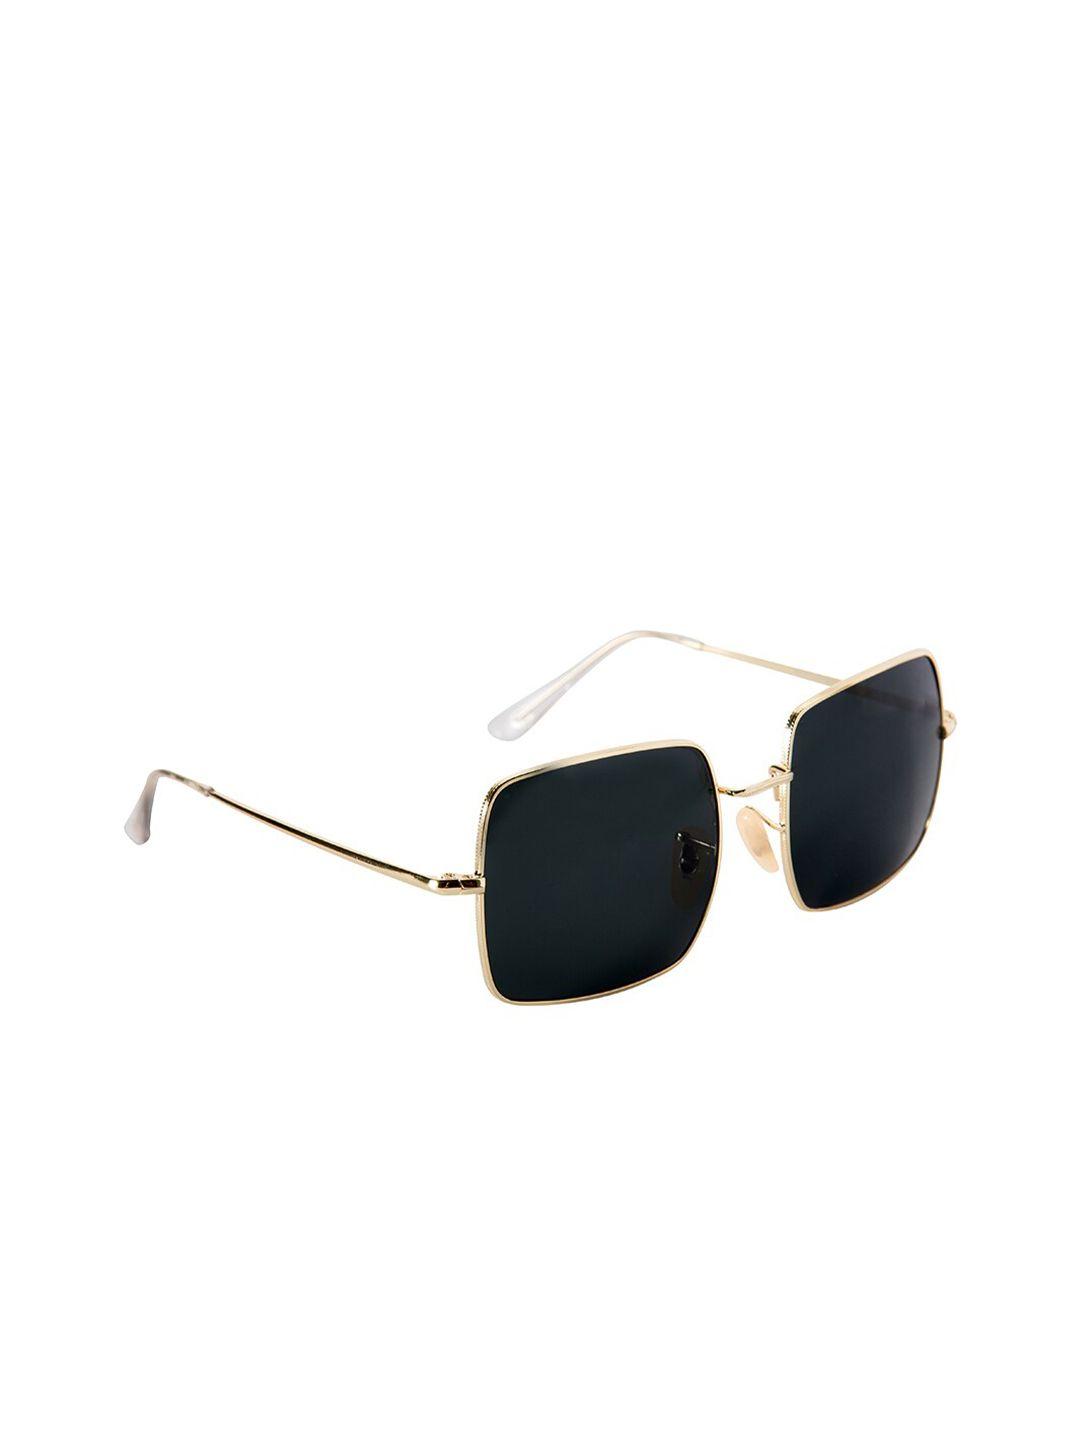 gio collection men grey lens & gold-toned square sunglasses - gm1971c02-grey